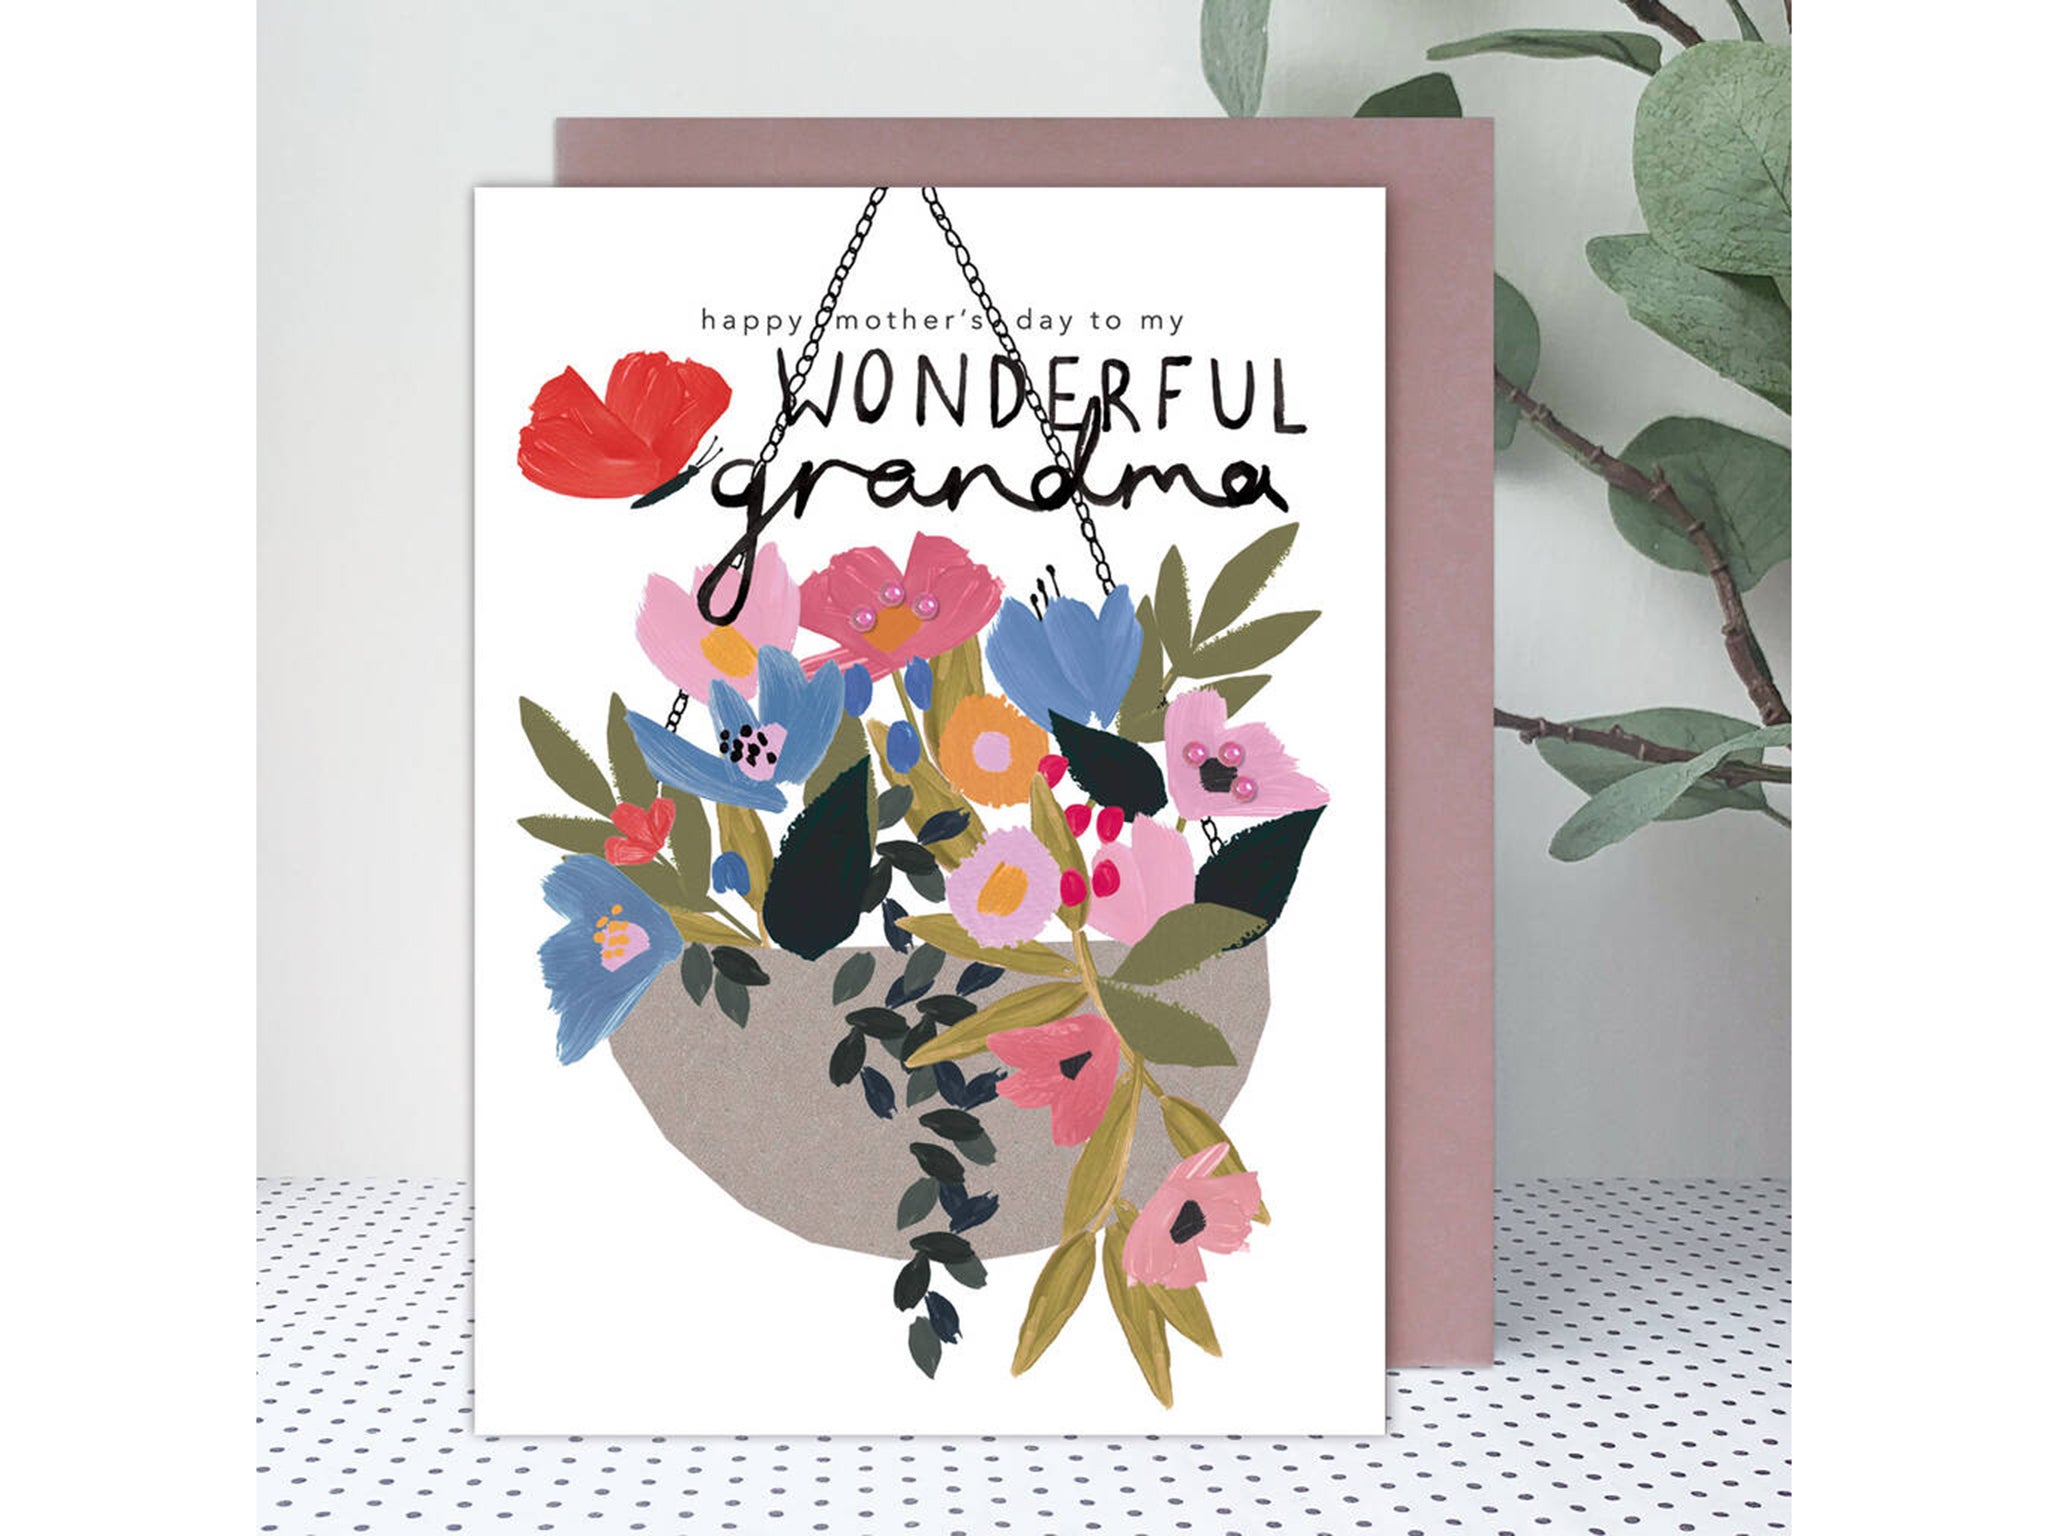 original_happy-mothers-day--card-for-grandma-indybest.jpg